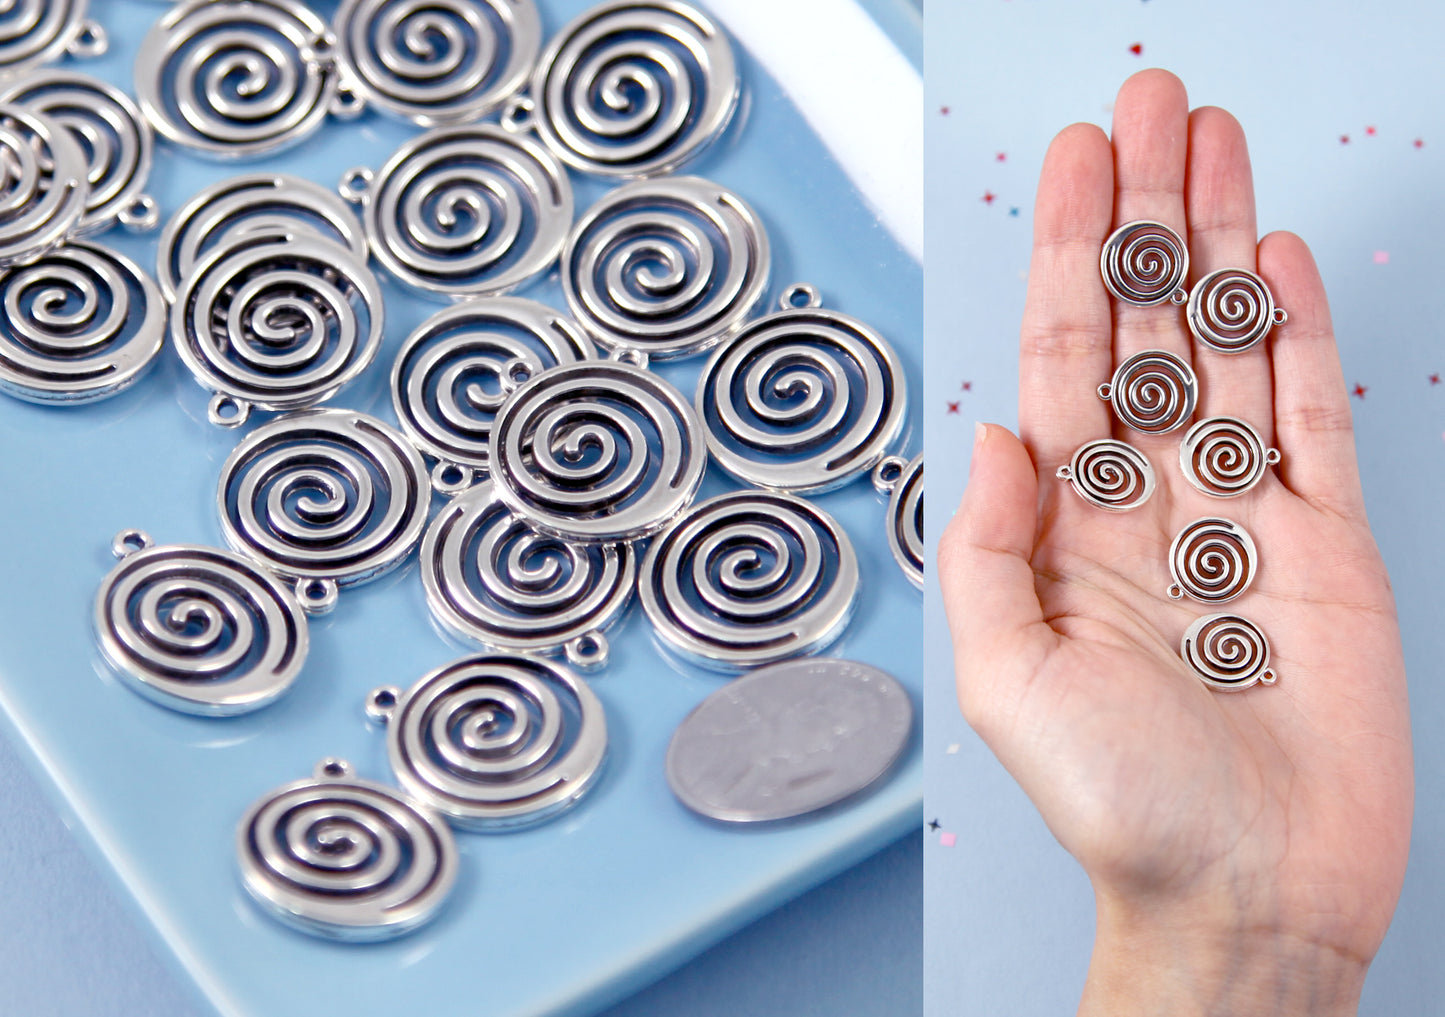 Spiral Charms - 20mm Swirl Pendants Silver Color Vortex Swirly Round Metal Charms - 12 pcs set